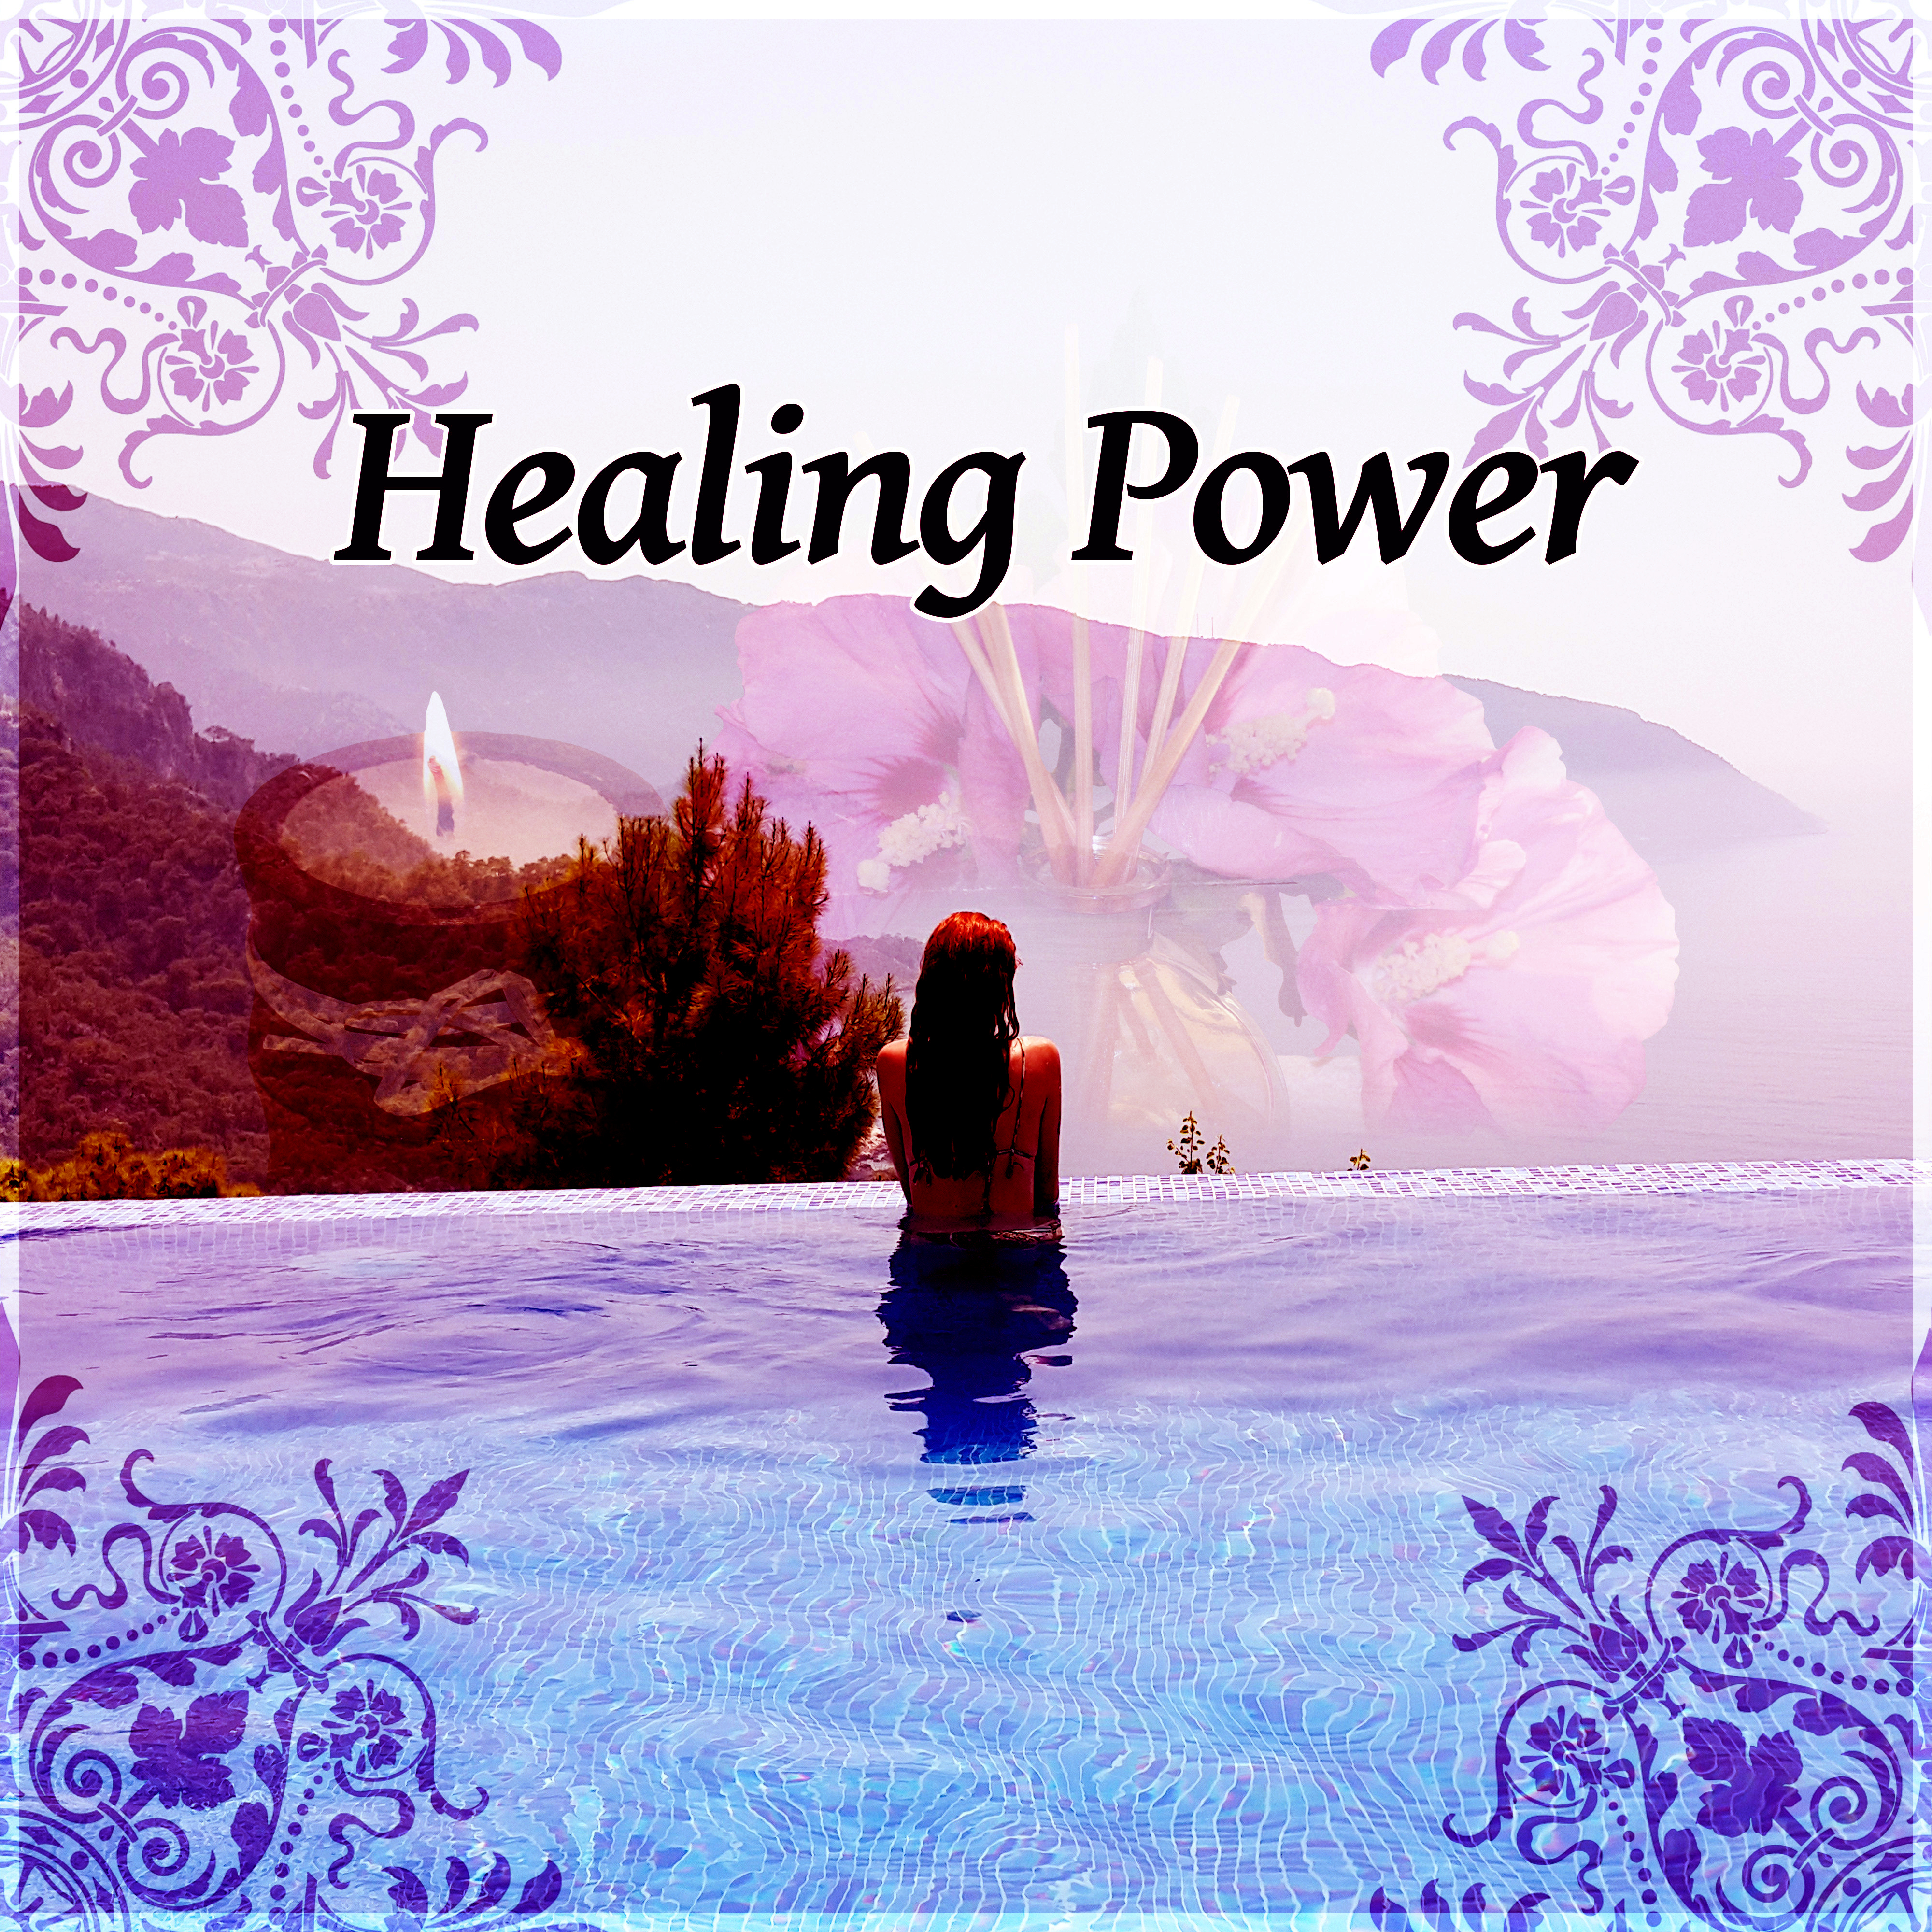 Healing Power  Calming  Healing Nature Sounds for Spa, Massage and Relaxation, Relaxing Massage, Reiki, Sauna, Spa, Nature Sounds